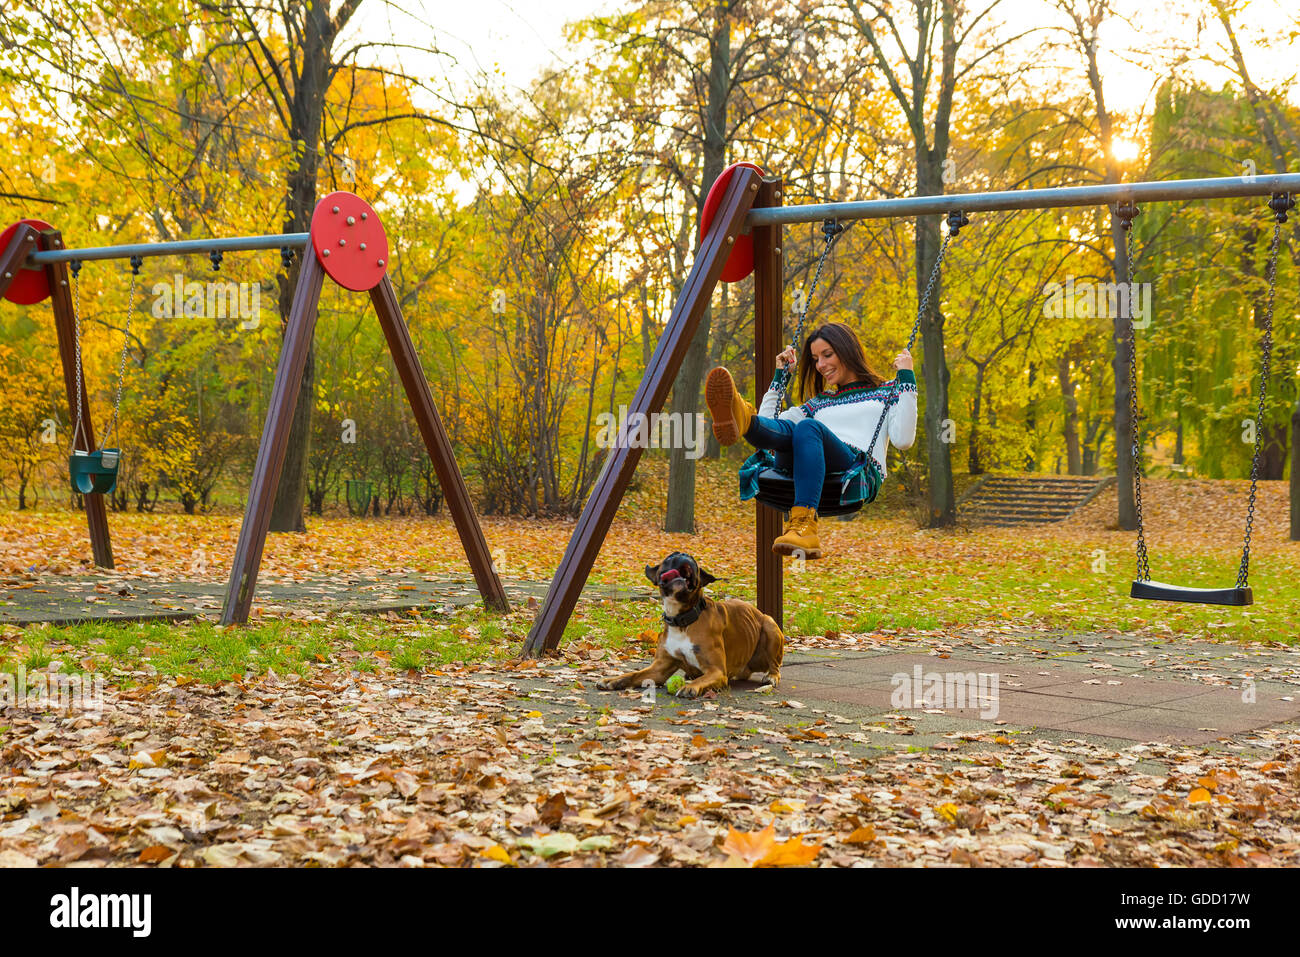 Beautiful young woman enjoying the autumn in the forest on a swing with her dog around. Stock Photo